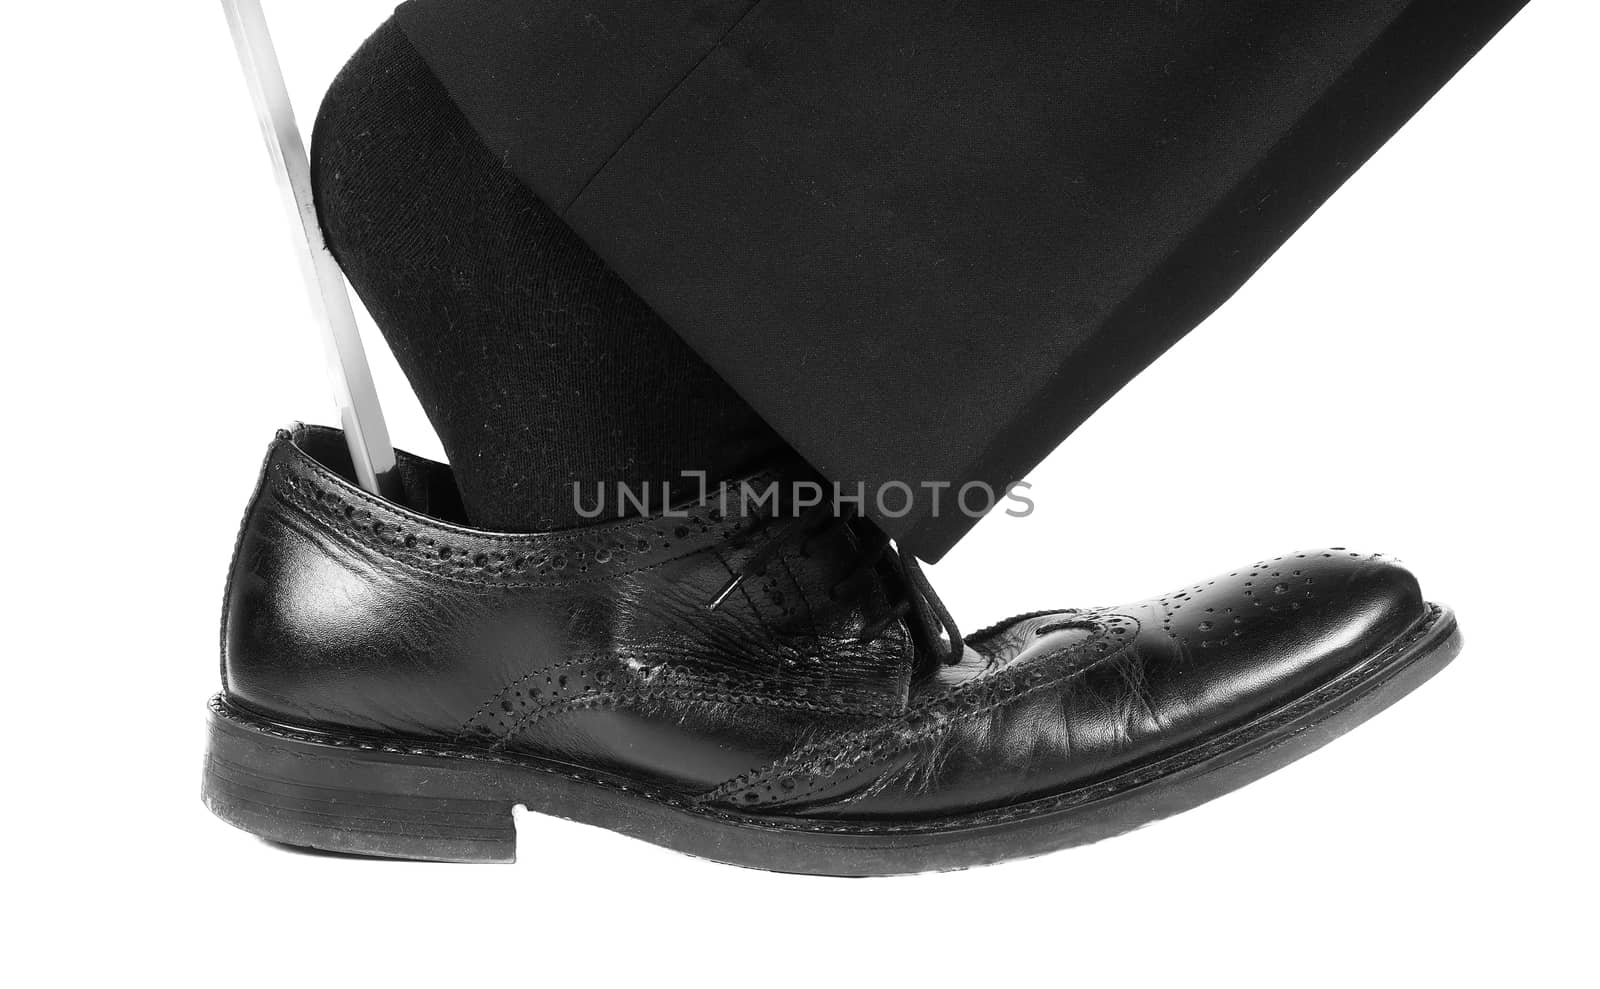 Person wearing black suit and socks entering foot into black leather shoe with shoehorn towards white